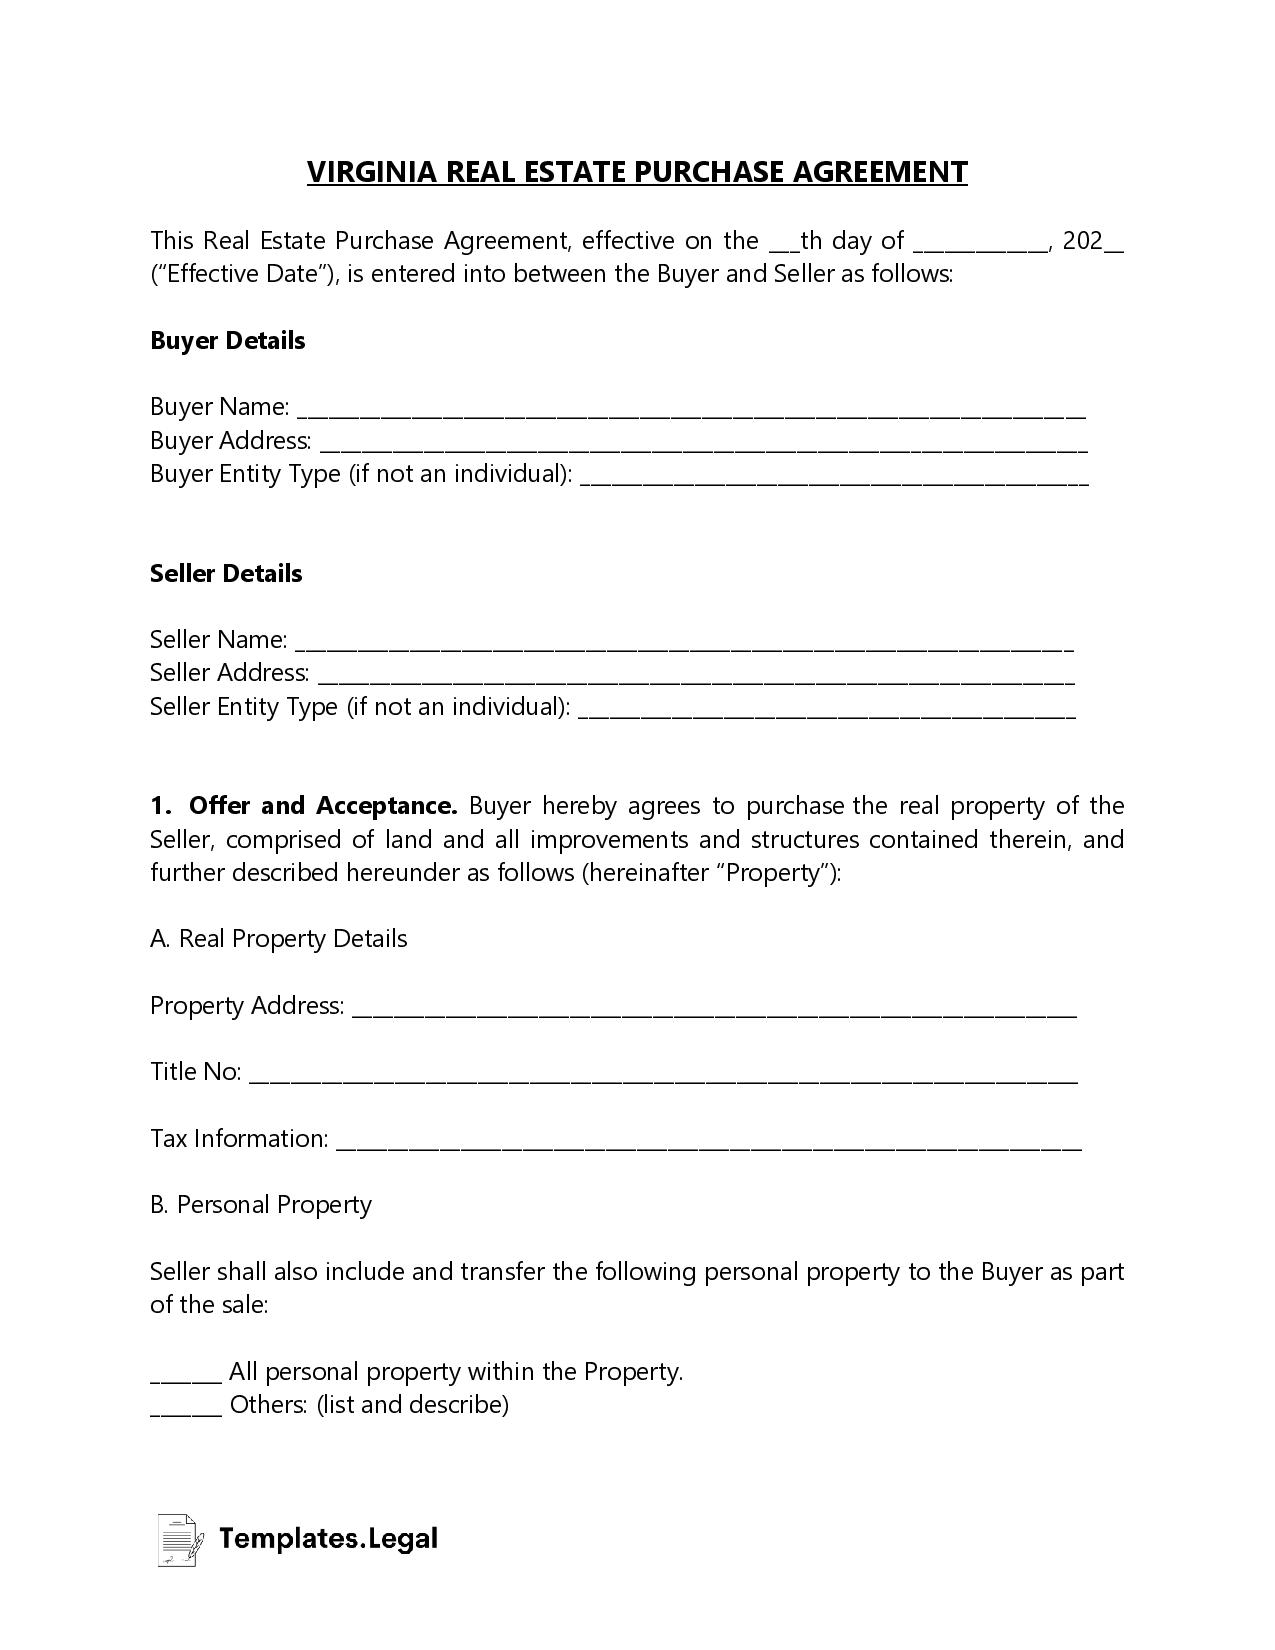 Virginia Real Estate Purchase Agreement - Templates.Legal